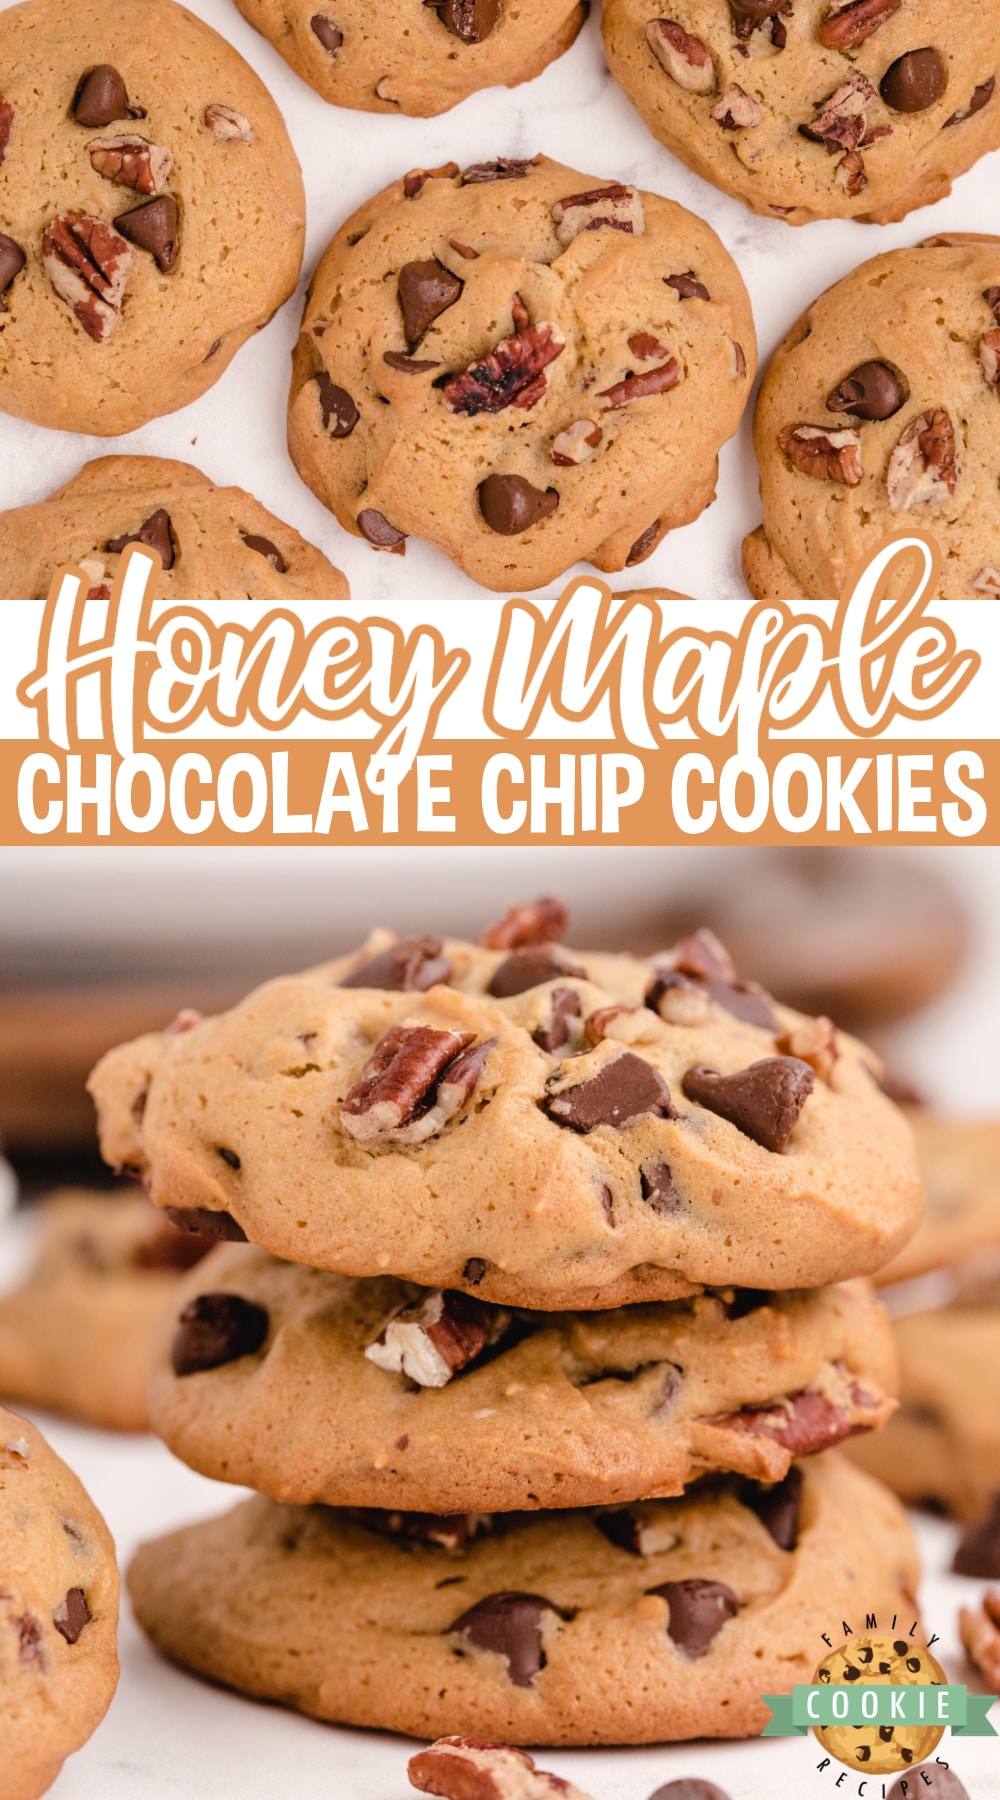 Honey Maple Chocolate Chip Cookies made with honey, maple syrup, pecans and chocolate chips. Amazingly flavorful and unique chocolate chip cookie recipe!